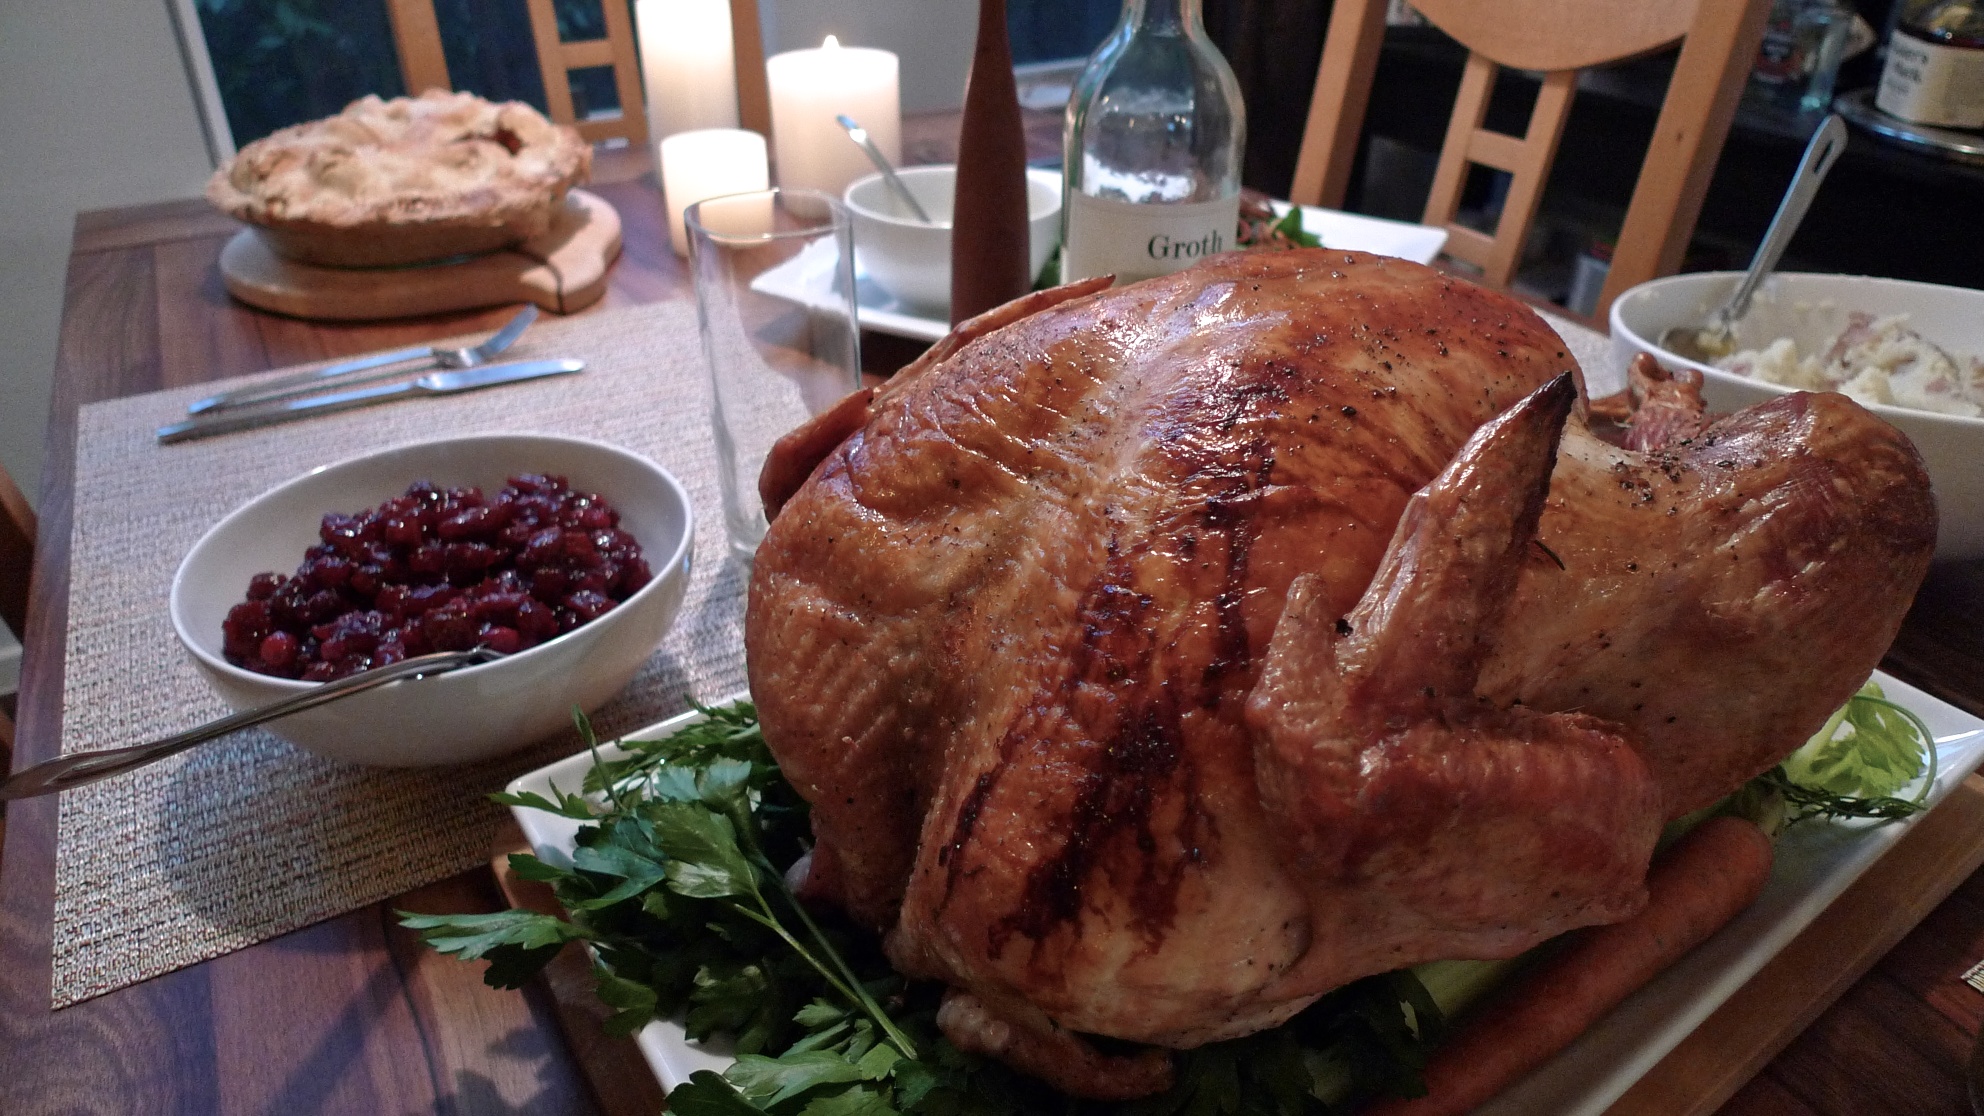 this turkey is one of the most authentic holiday turkeys